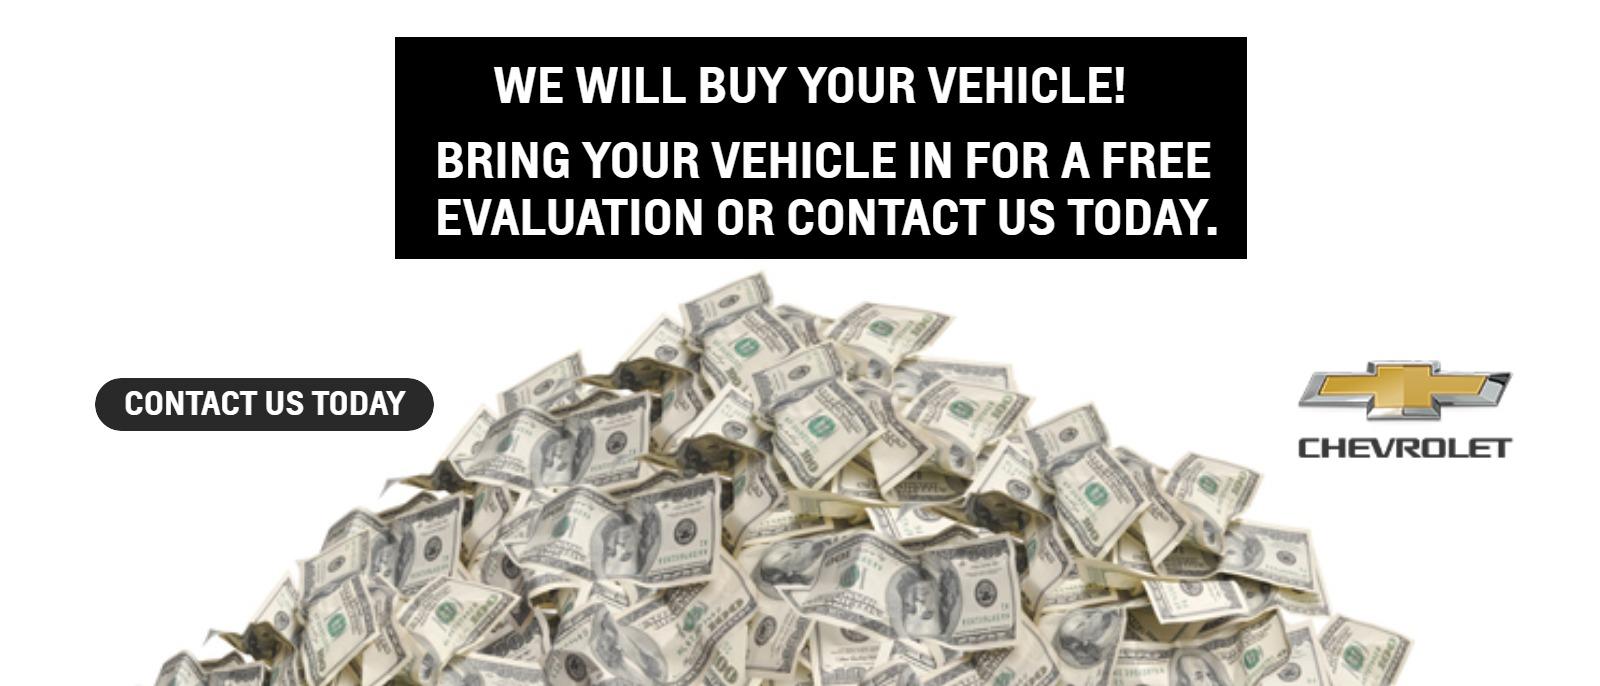 WE WILL BUY YOUR VEHICLE! BRING YOUR VEHICLE IN FOR A FREE EVALUATION OR CONTACT US TODAY.